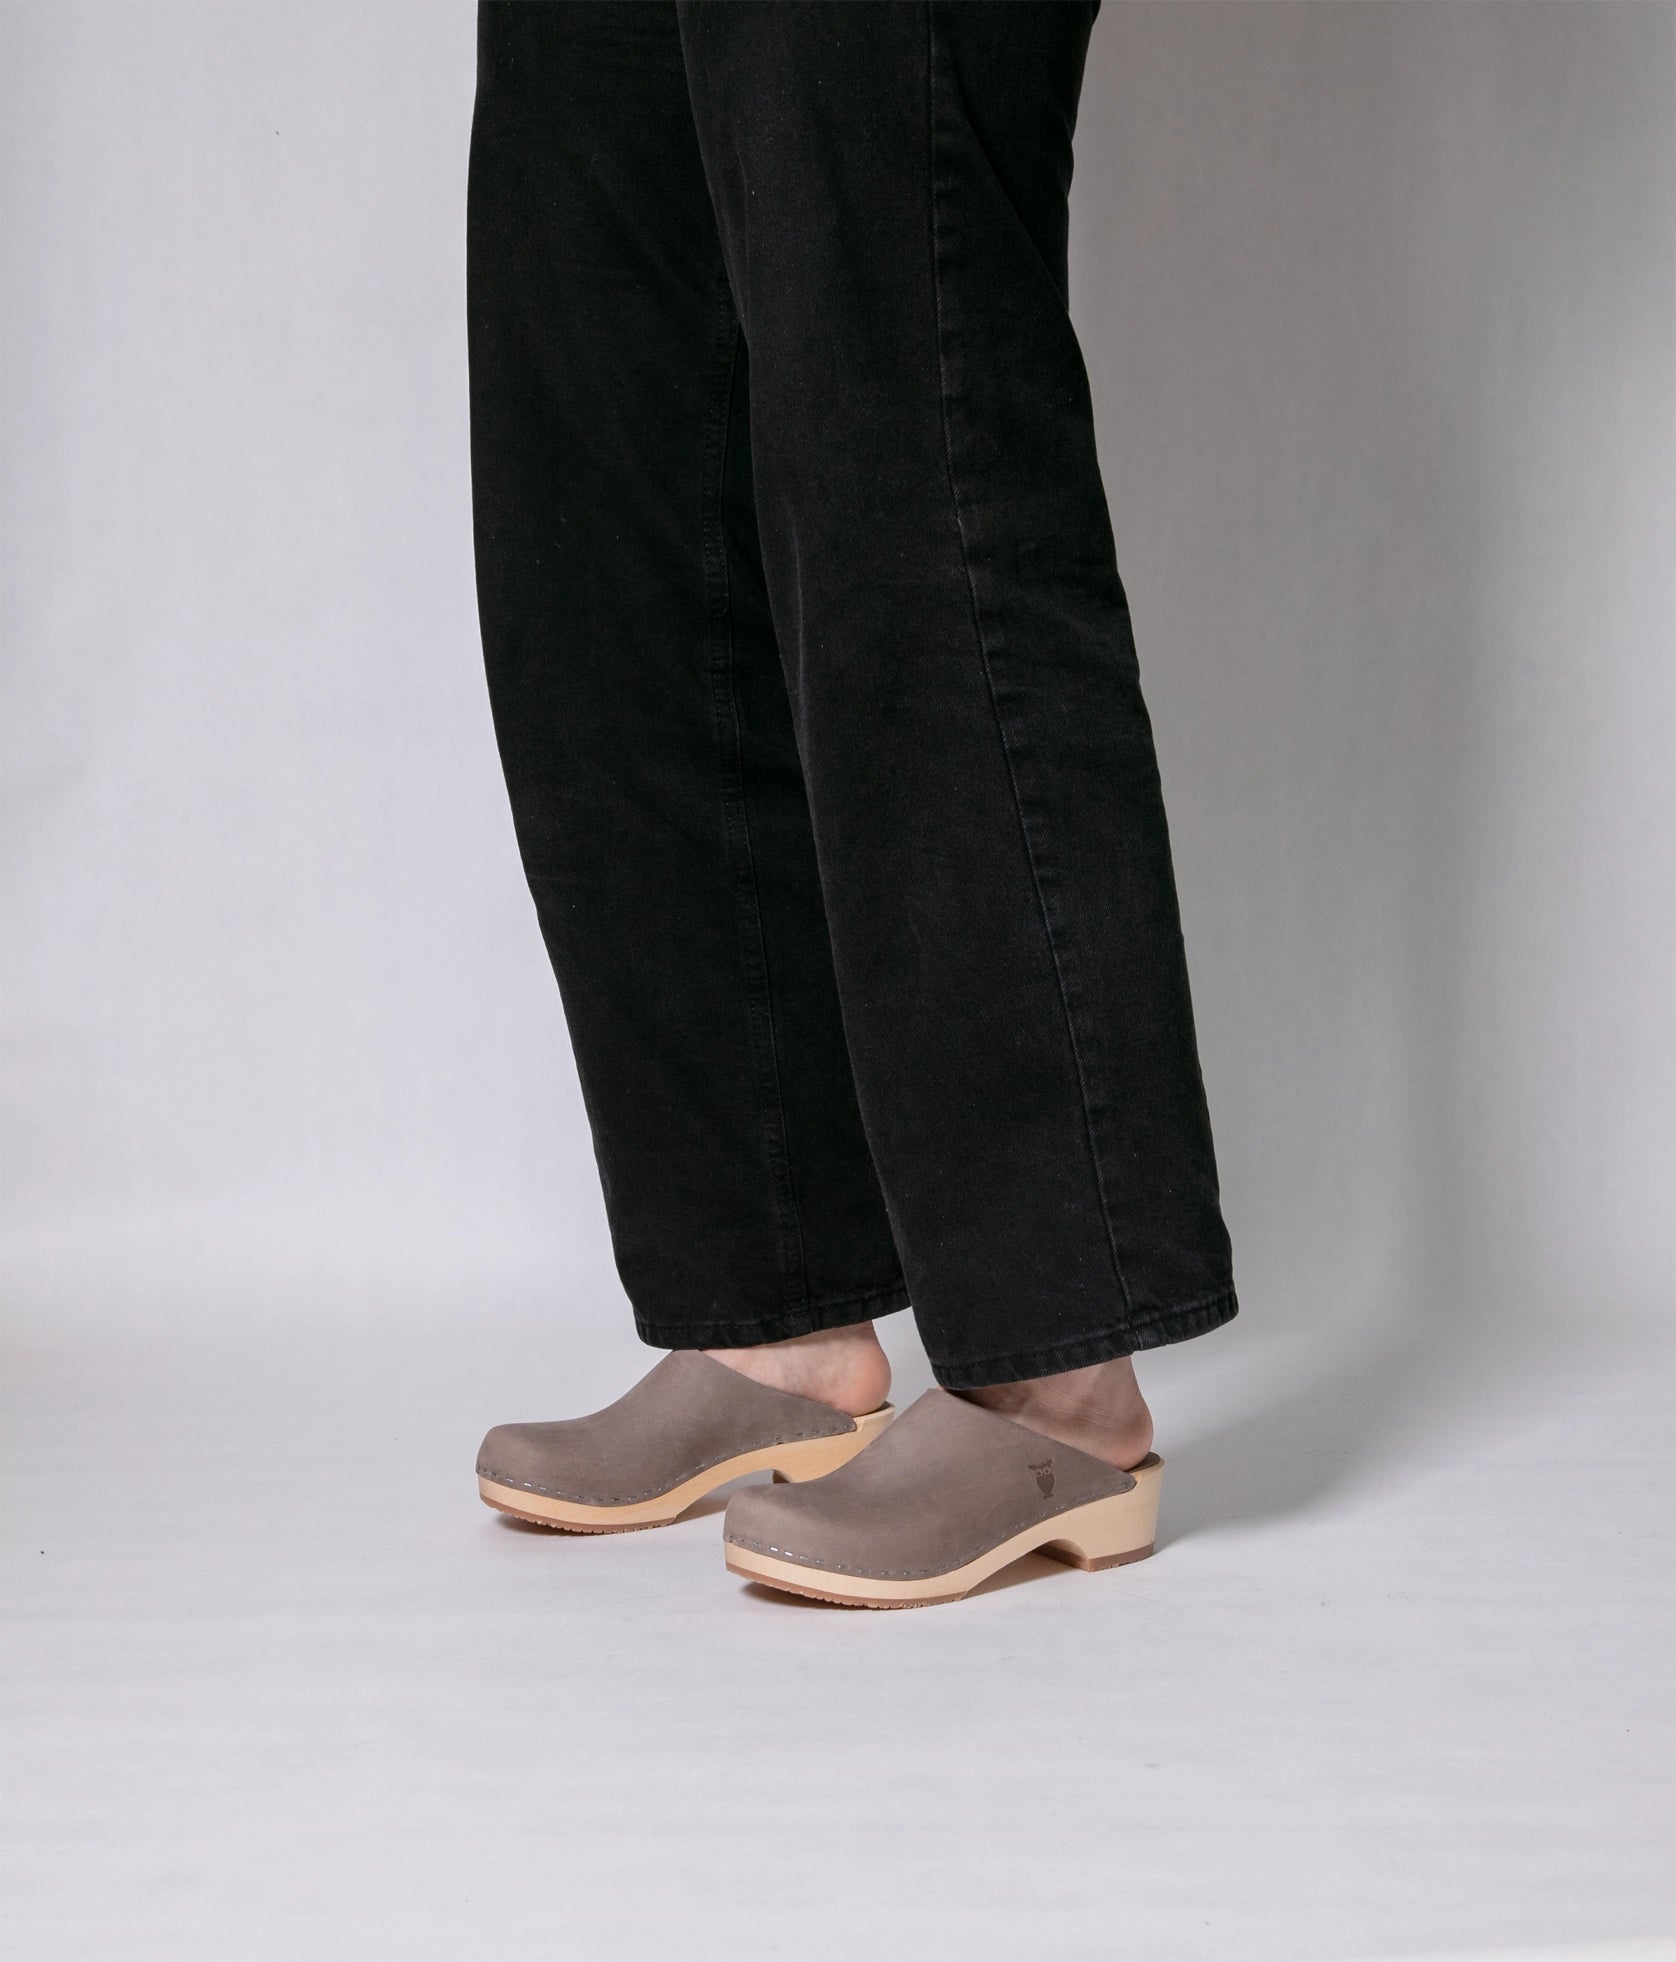 low heeled minimalistic clog mules in stone grey nubuck leather stapled on a light wooden base